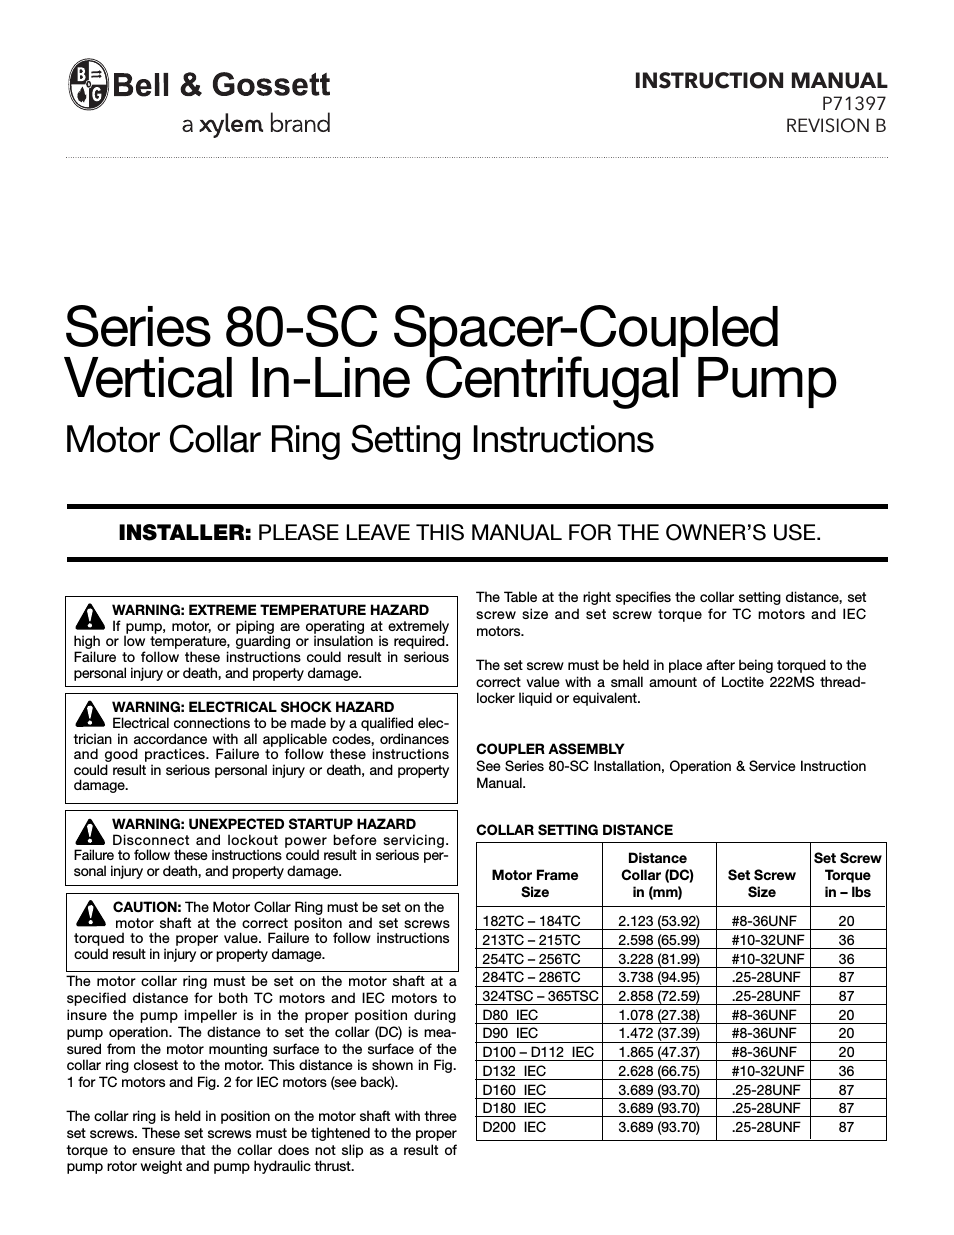 P71397B Series 80-SC Spacer-Coupled Vertical In-Line Centrifugal Pump Motor Collar Ring